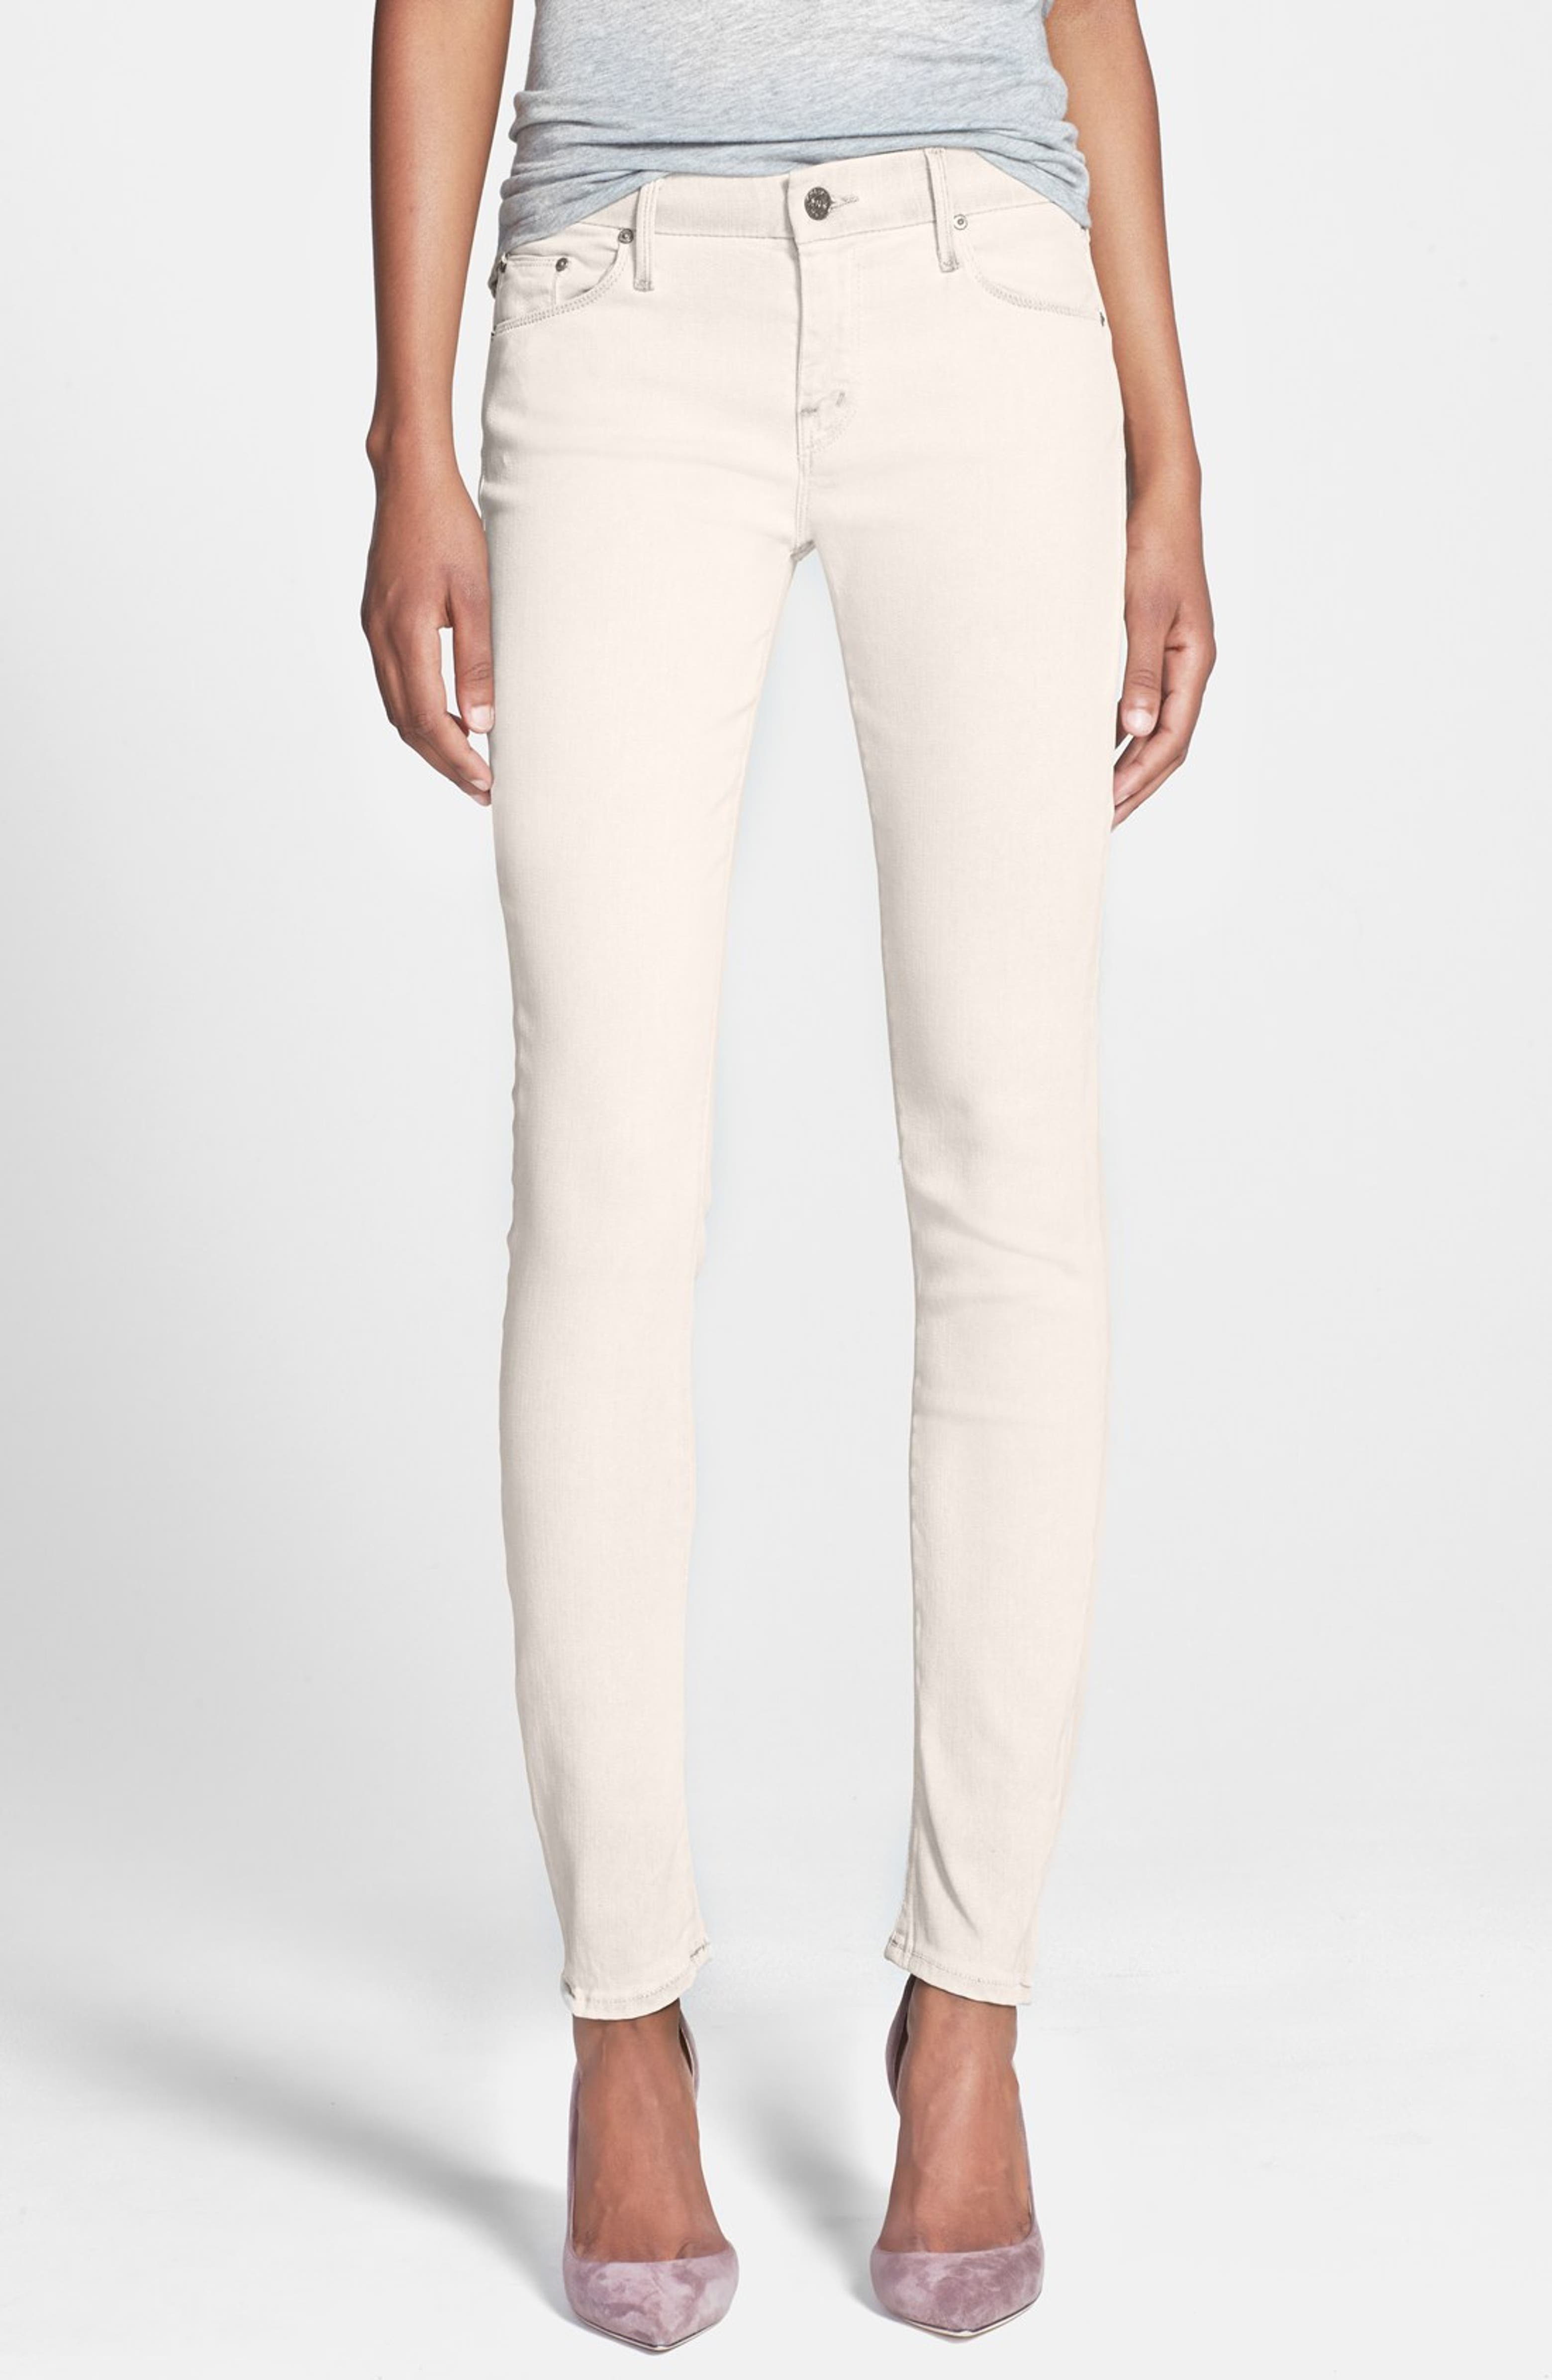 MOTHER 'The Looker' Skinny Stretch Jeans | Nordstrom